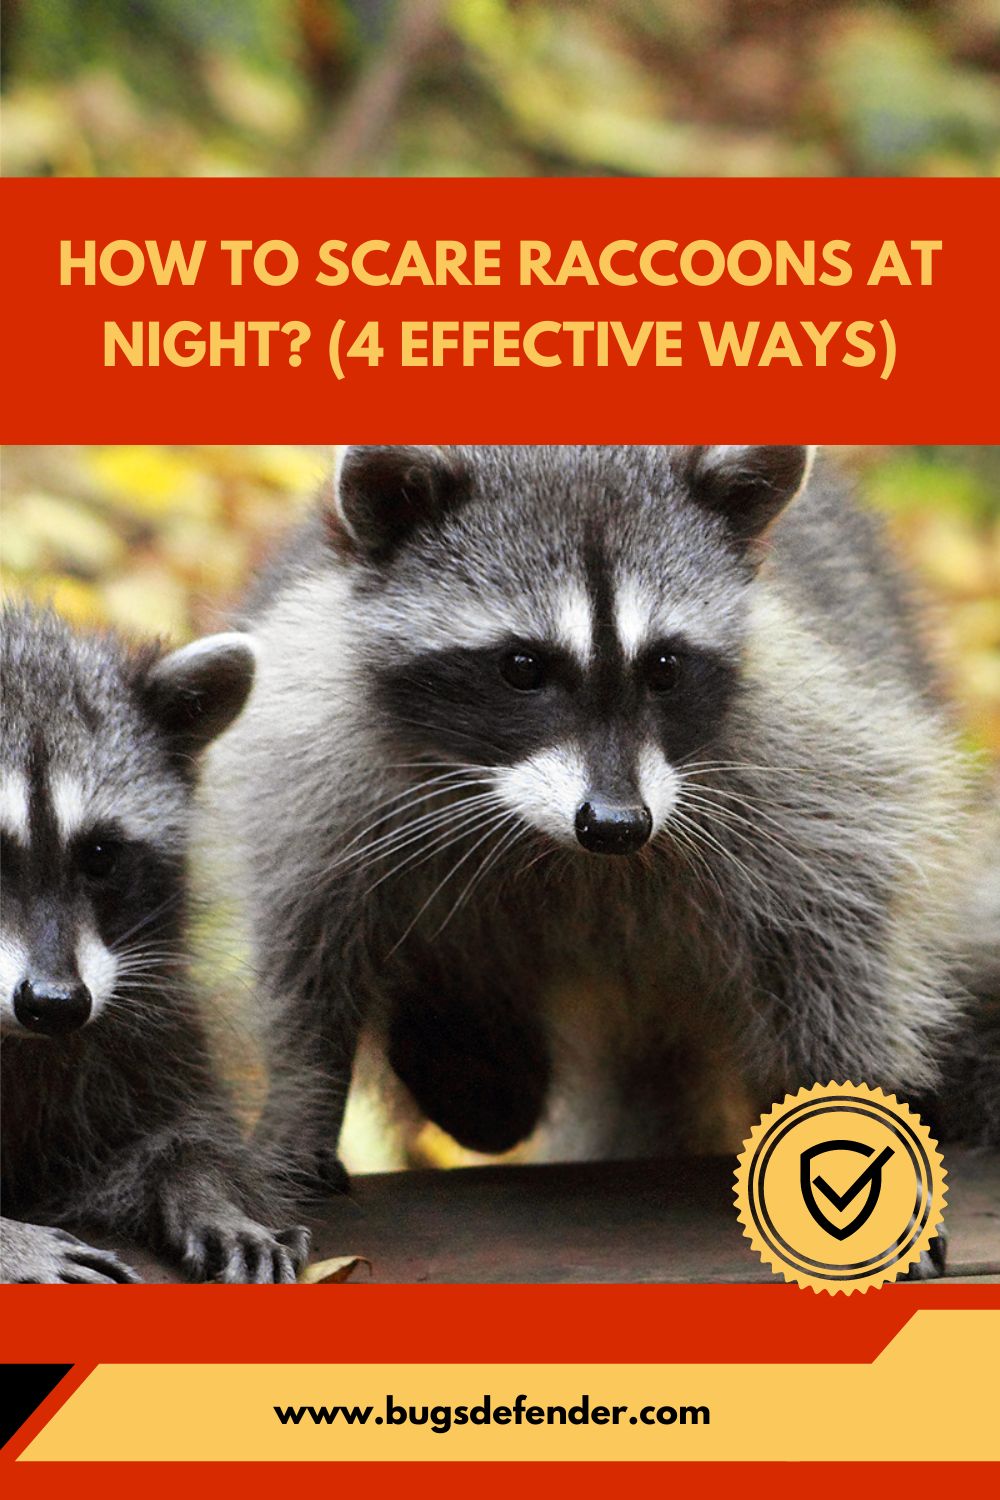 How to Scare Raccoons at Night (4 Effective Ways)pin1